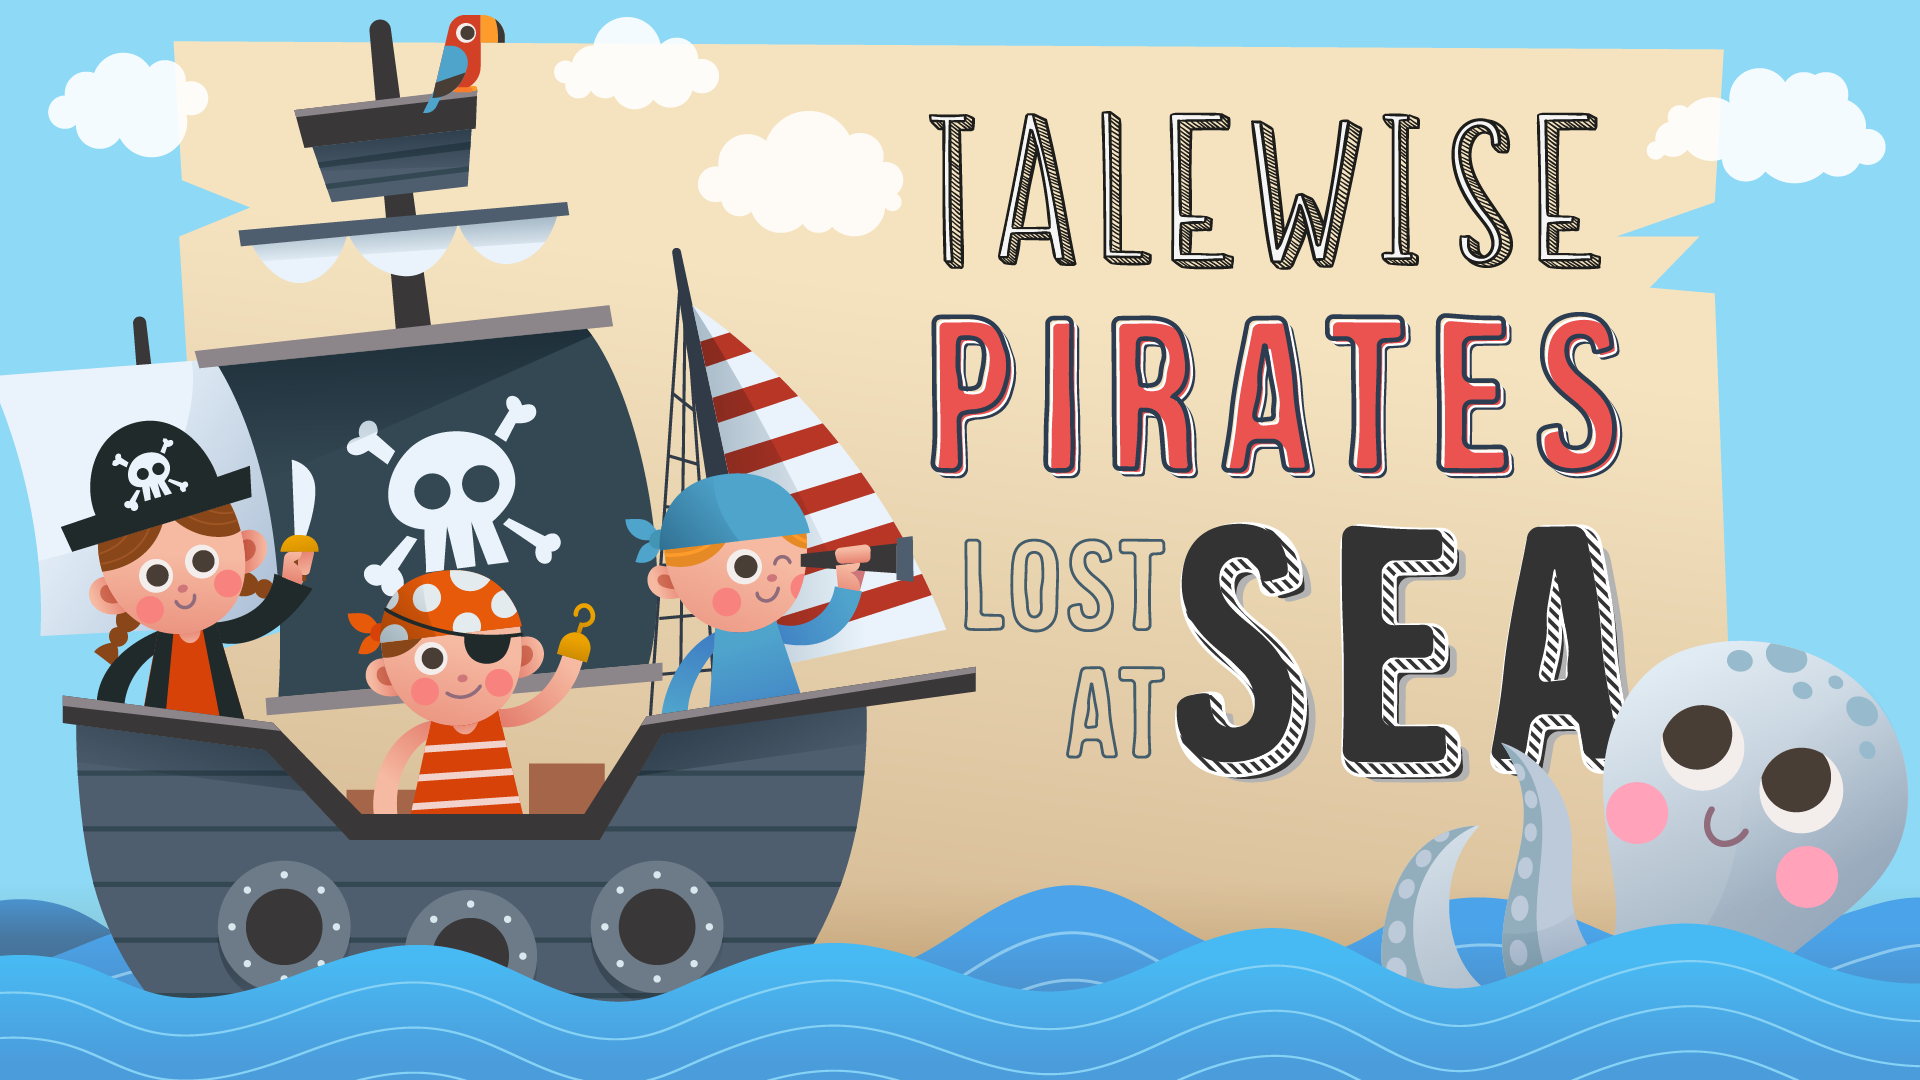 event cover: talewise: pirates lost at sea